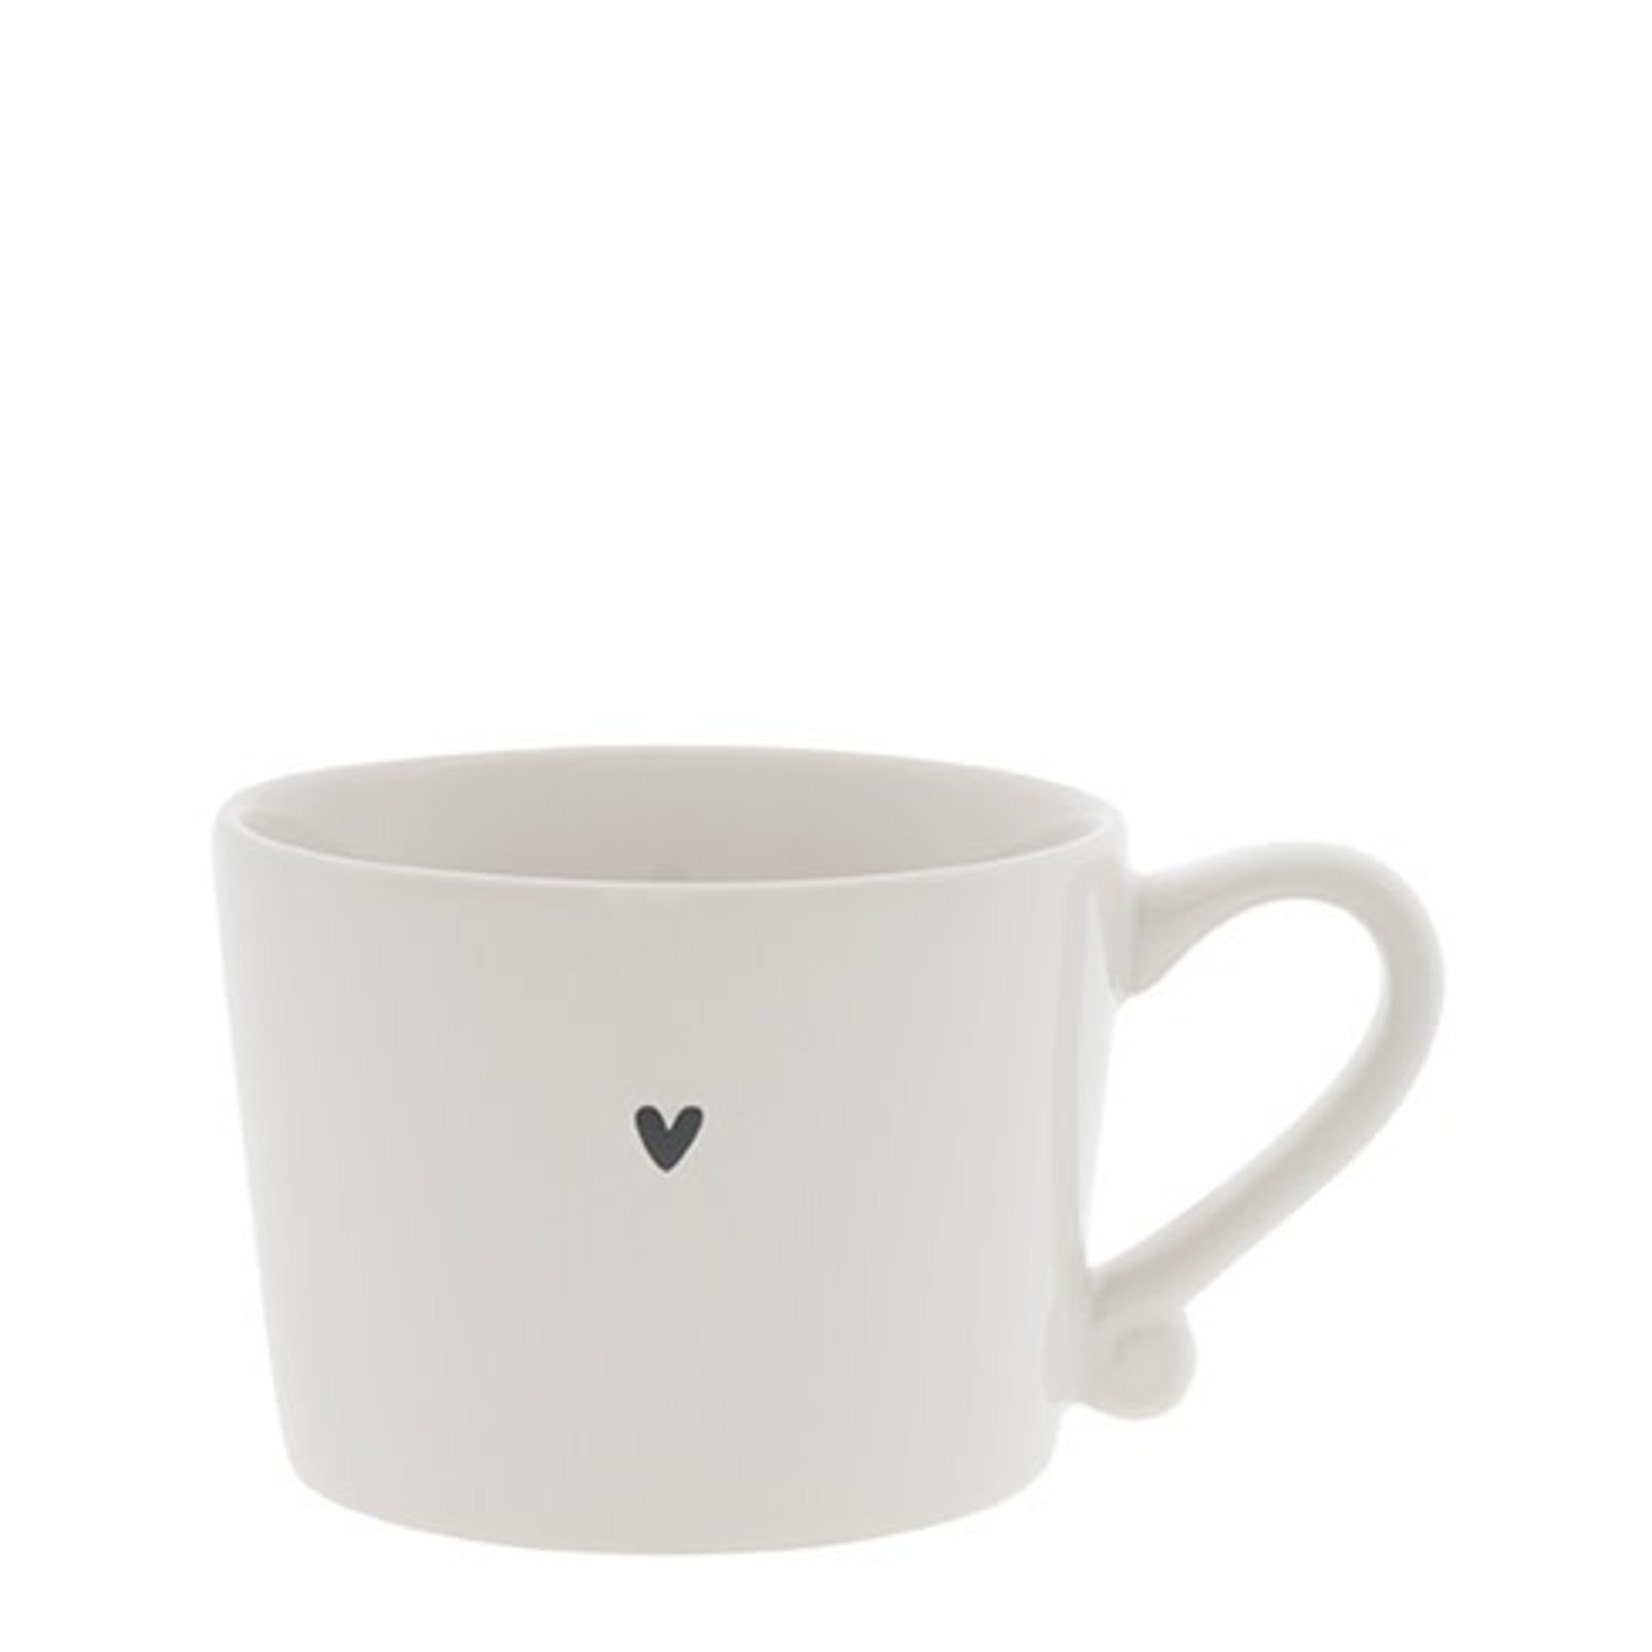 Bastion Collections Cup small White Heart in Black